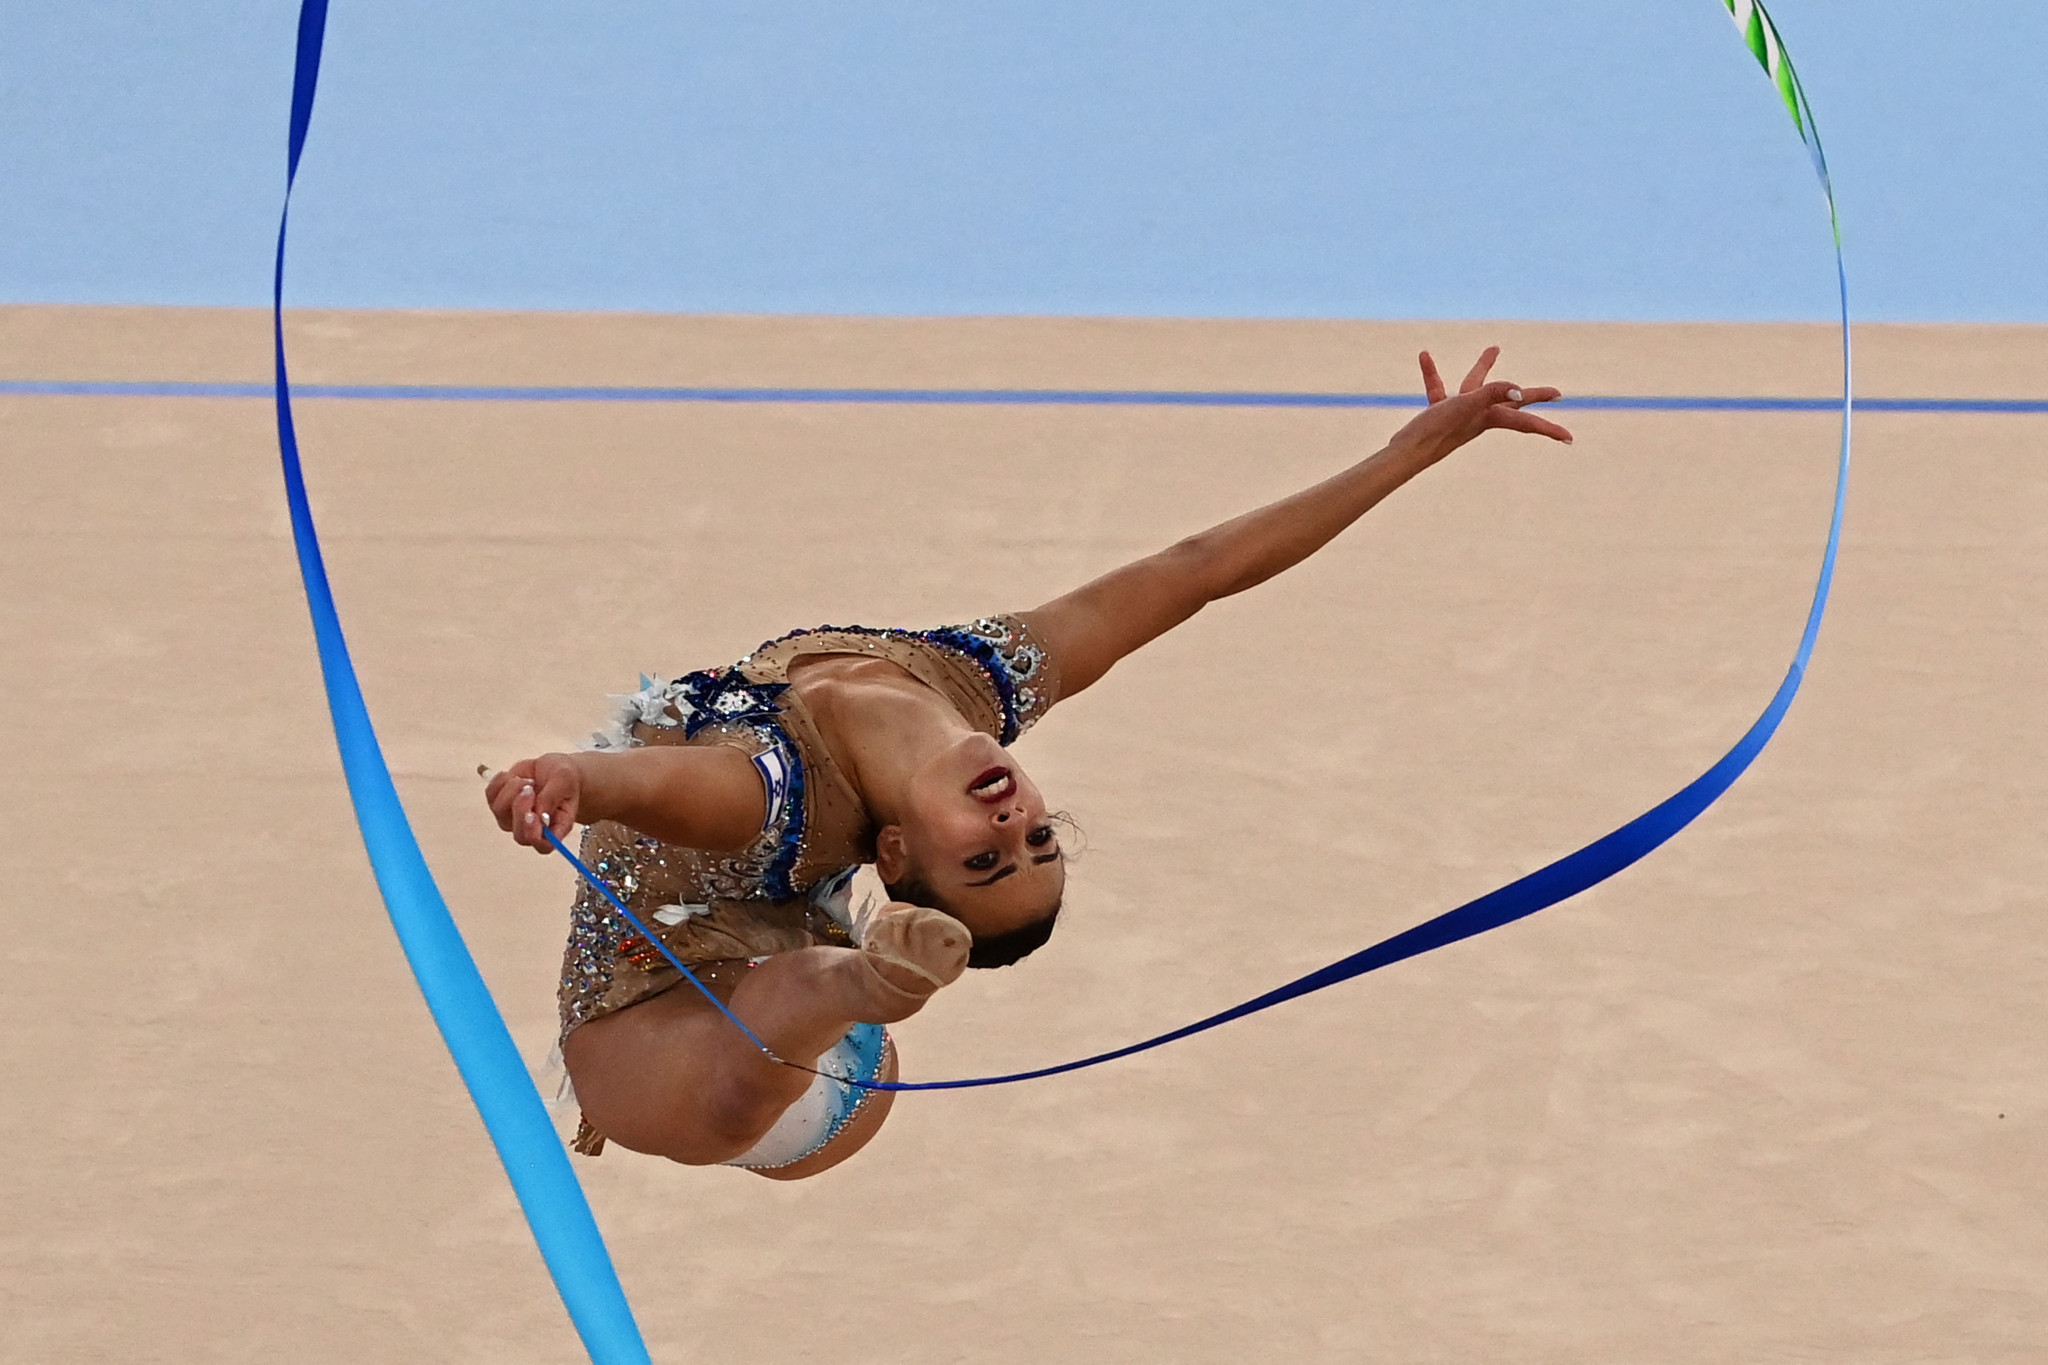 Irina Viner was critical of judging at the rhythmic gymnastics during Tokyo 2020 where Israel's Linoy Ashram beat Dina Averina to ensure Russia did not win an Olympic gold medal in the sport for the first time for quarter-of-a-century ©Getty Images